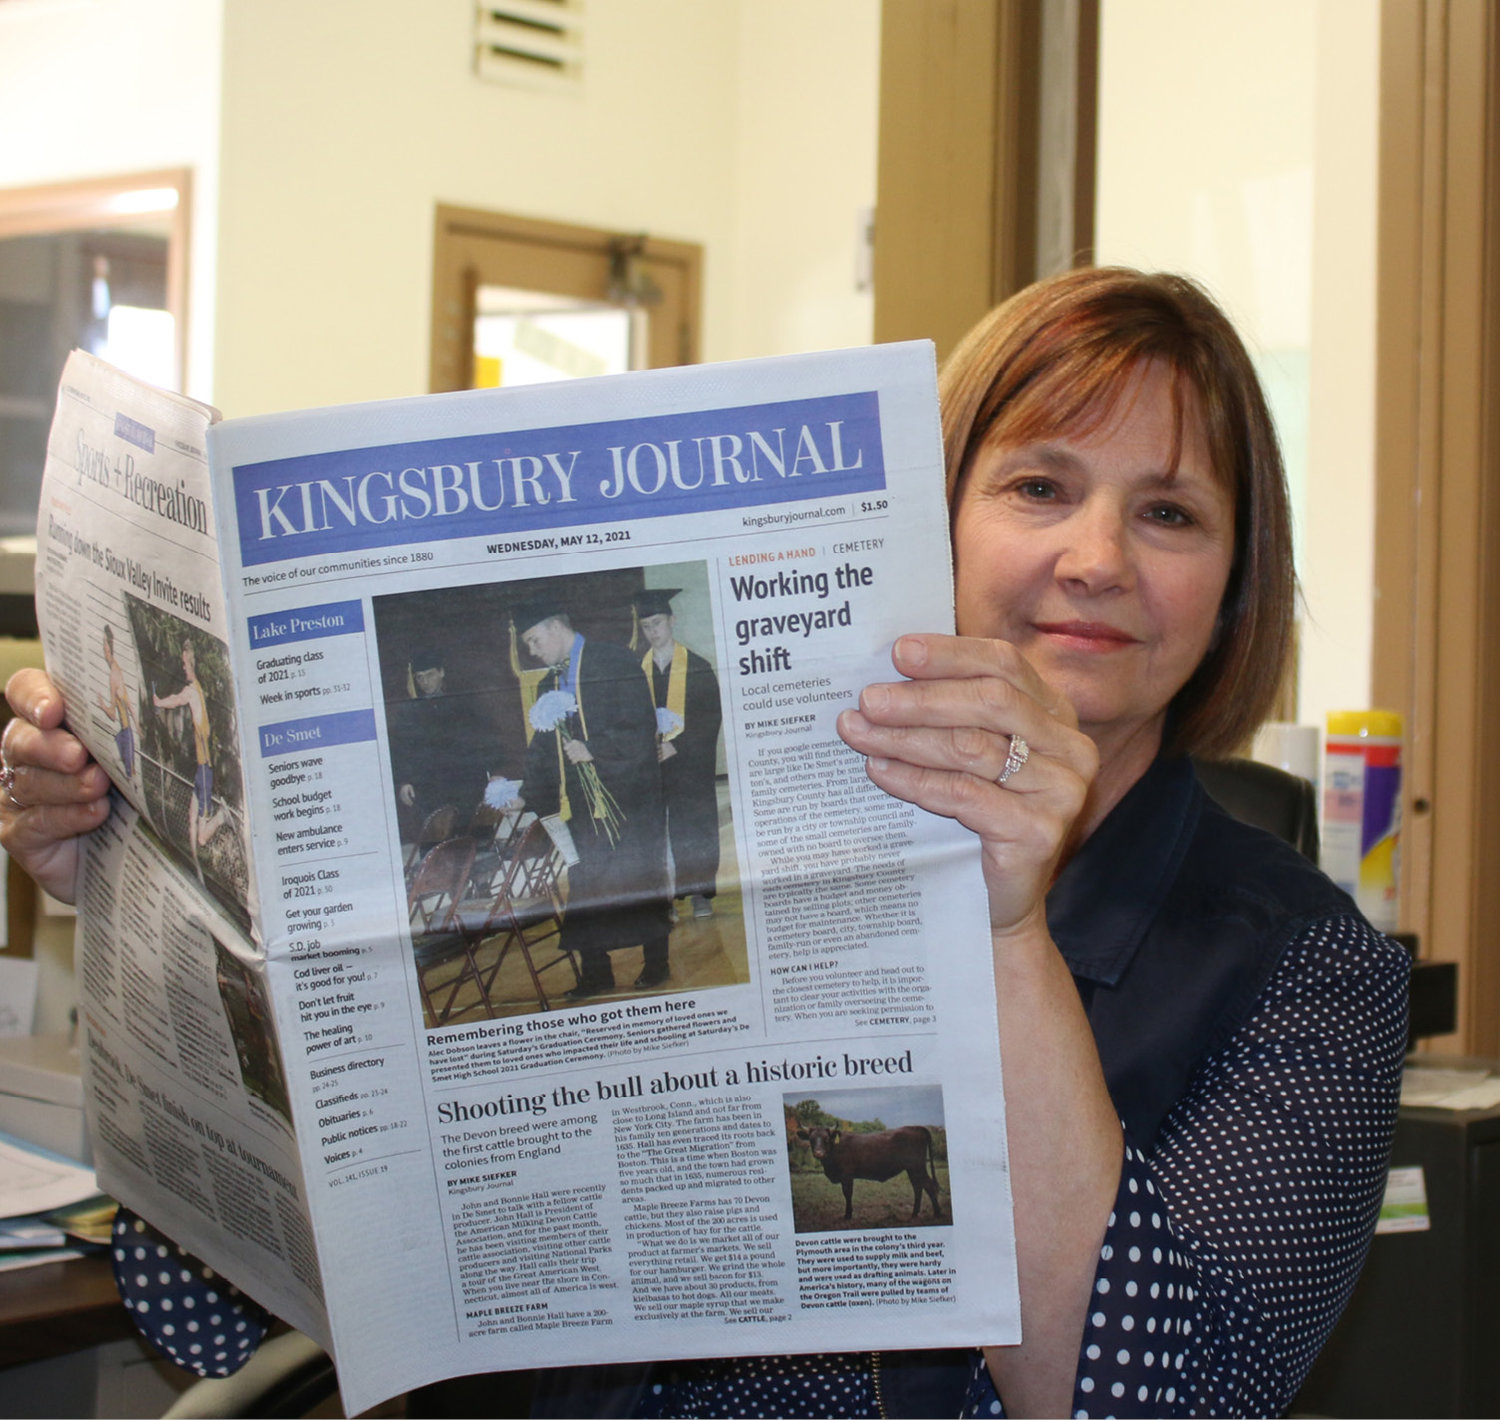 Penny Warne volunteers seven to fifteen hours a week as the Kingsbury Journal’s Copy Editor. She has volunteered since the newspaper first started May 20, 2020. Warne is a retired schoolteacher, and that makes the job a great fit for her and the Journal.